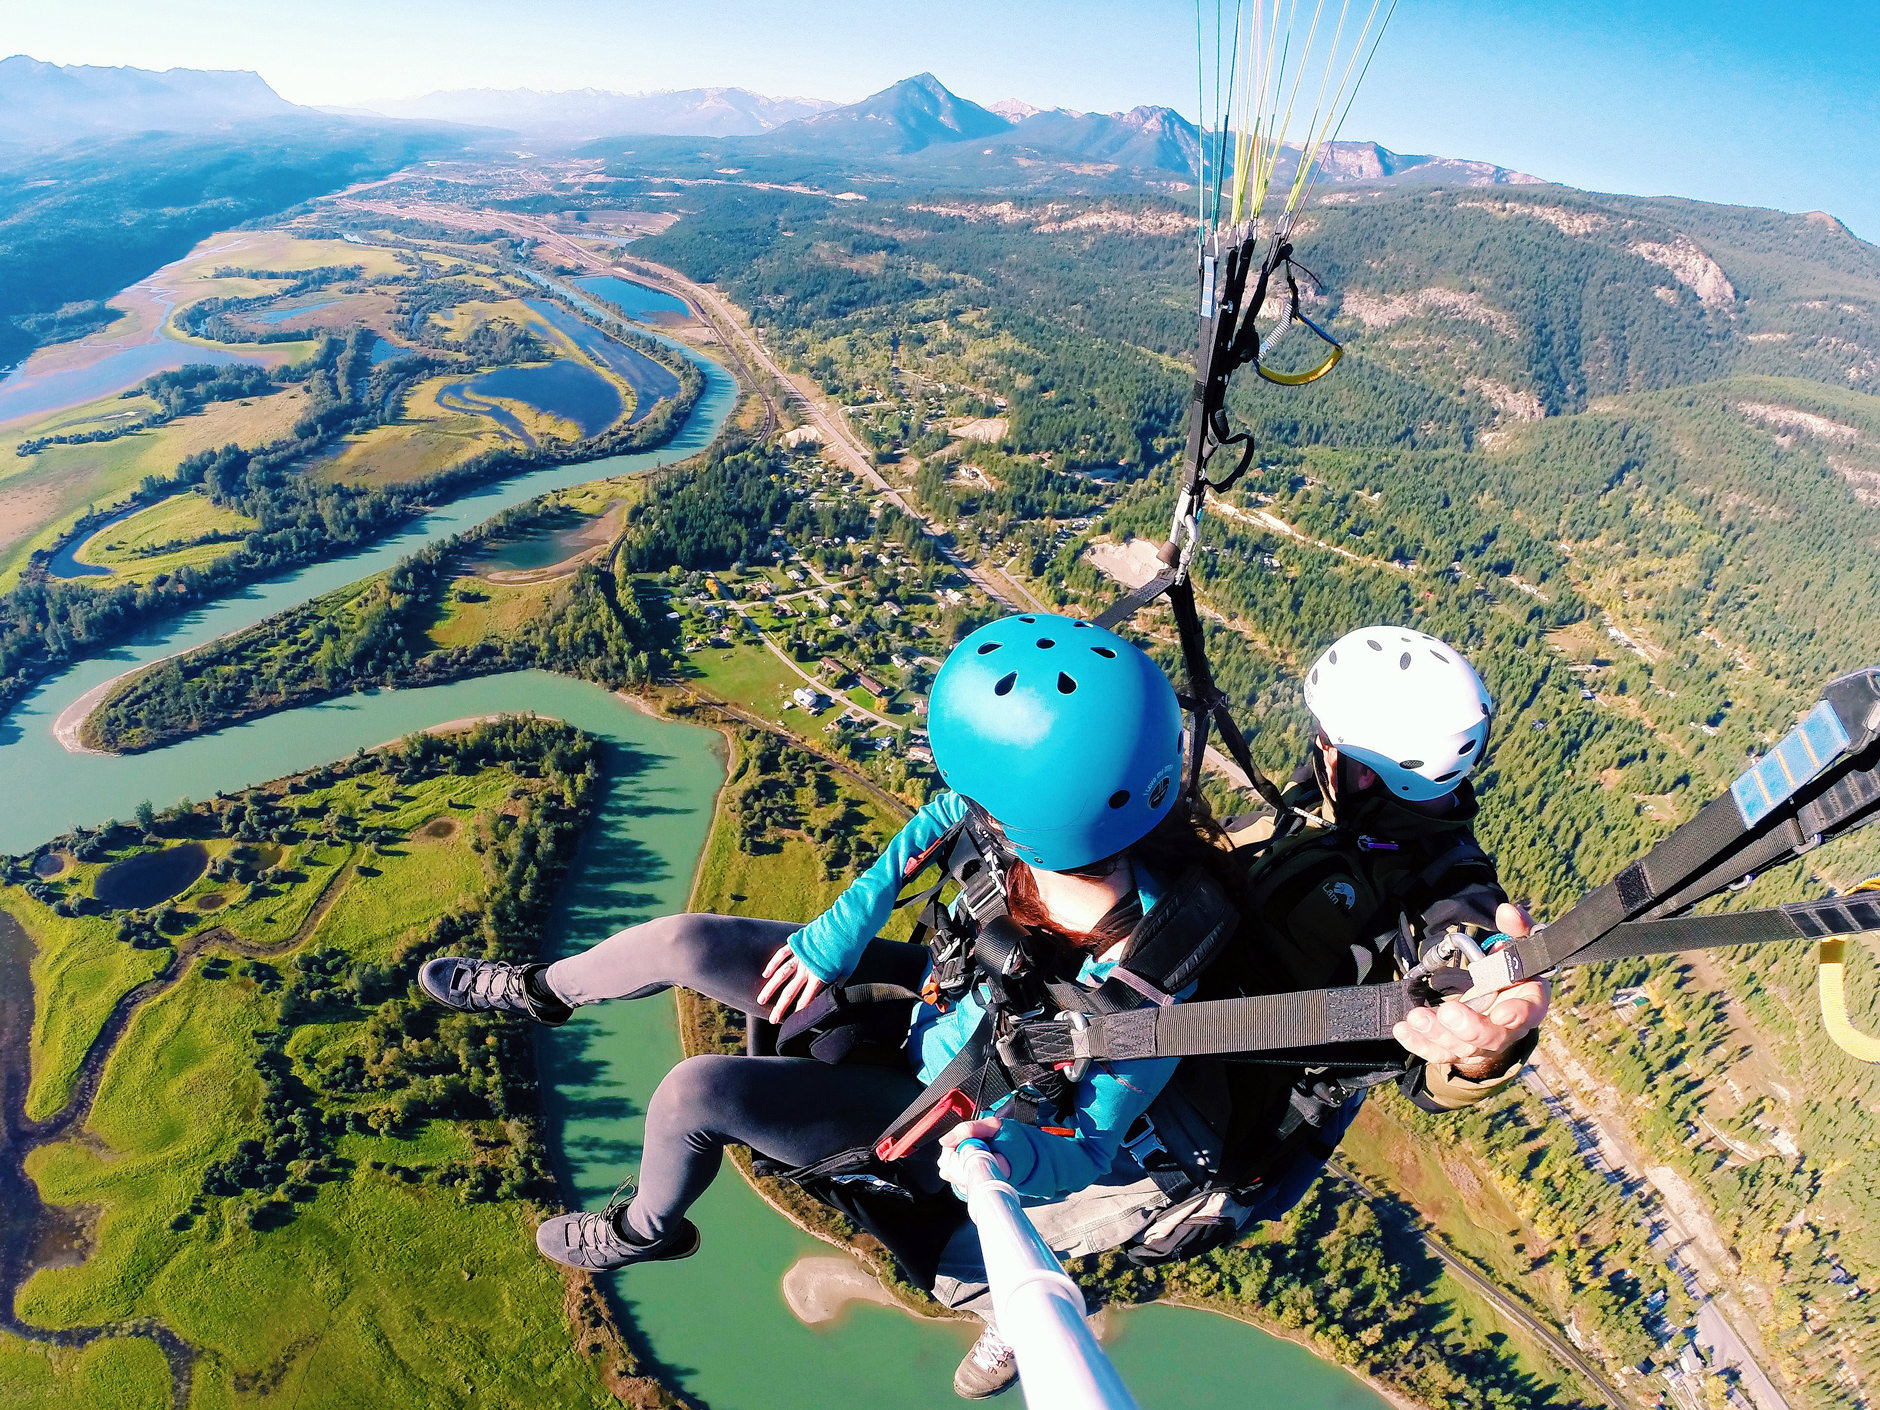 Two people paragliding over land and water landscapes.